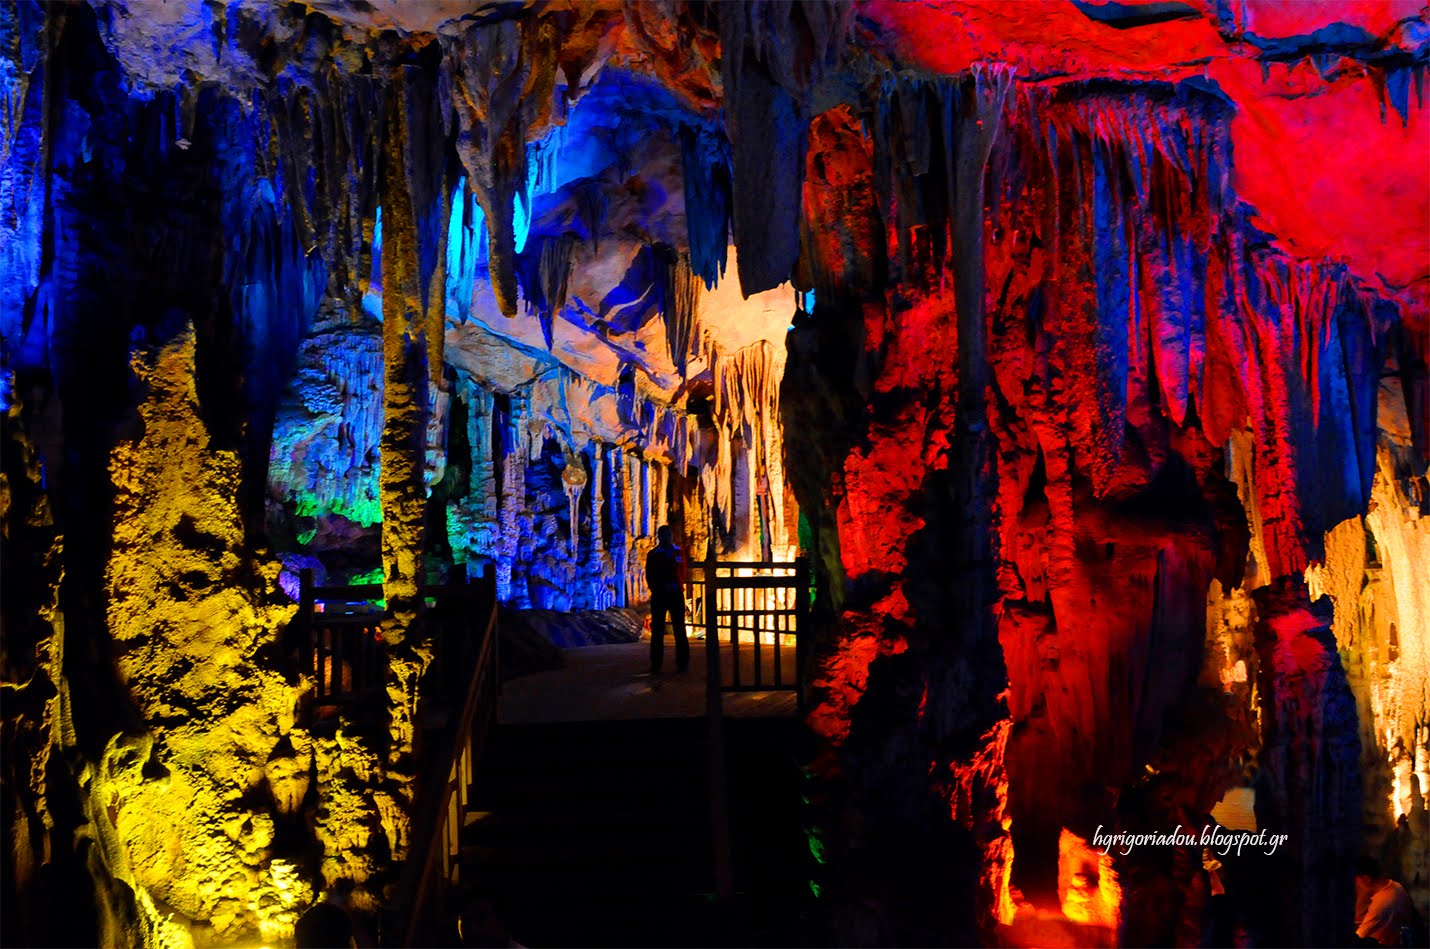 Guilin : take a look at some of Earth's most incredible caves